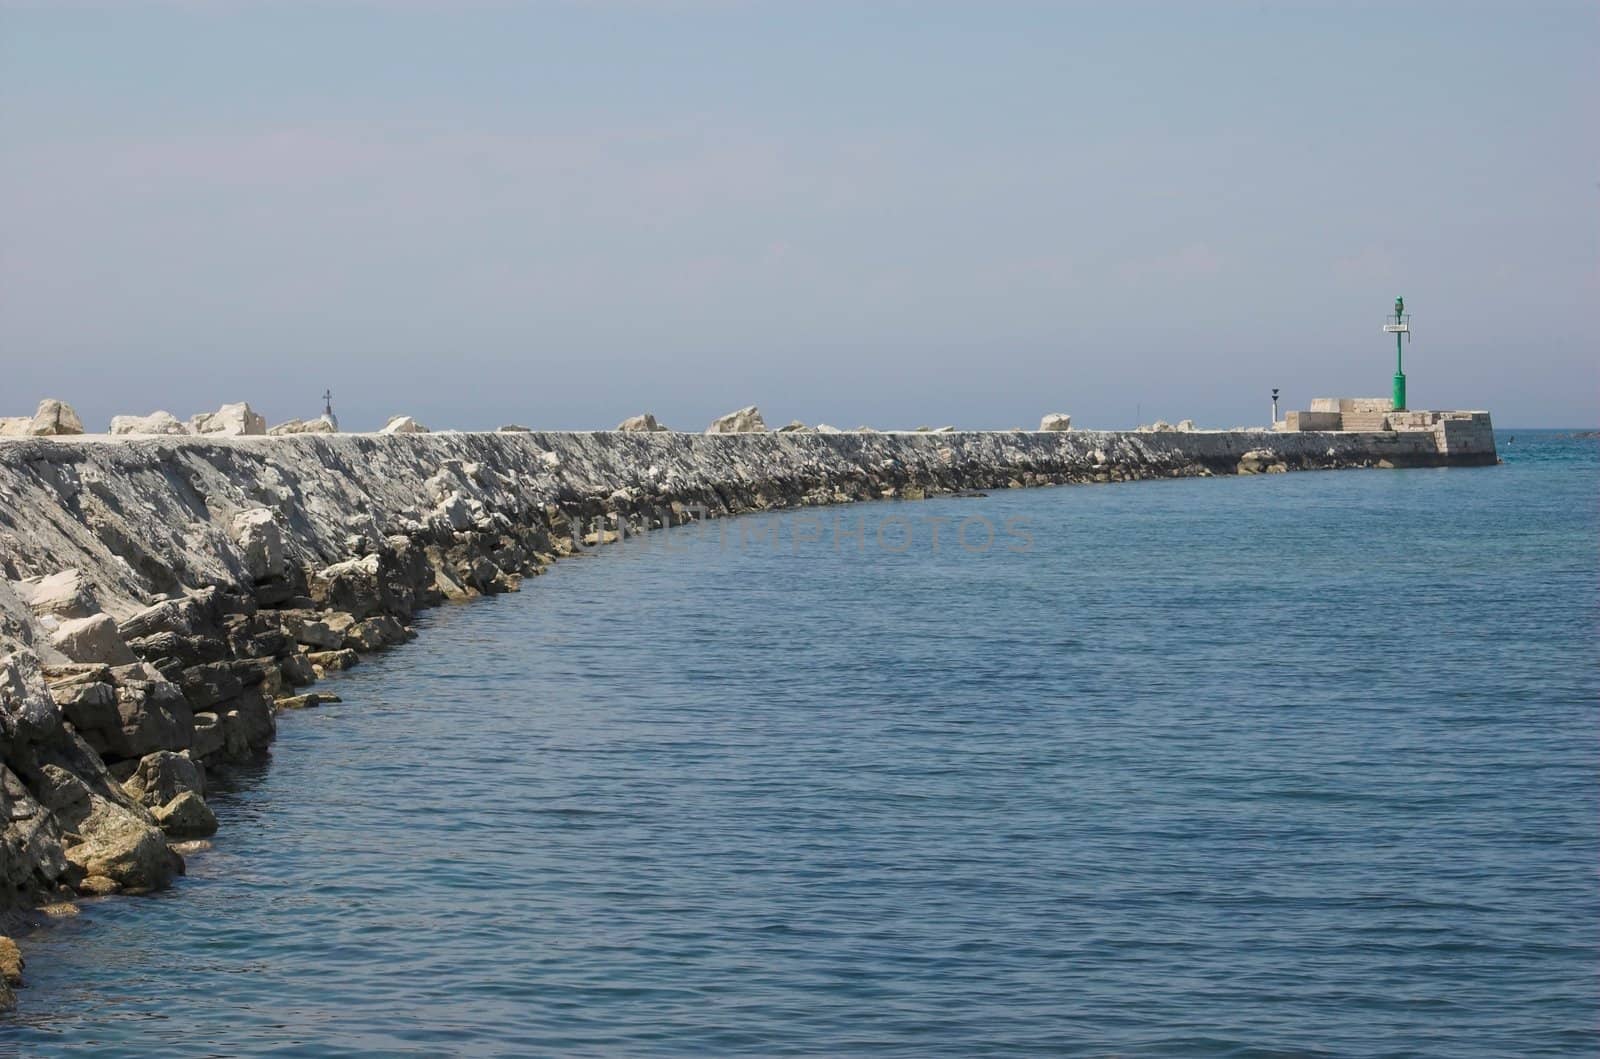 Bay wall (windshield) in the city of Umag in Croatia